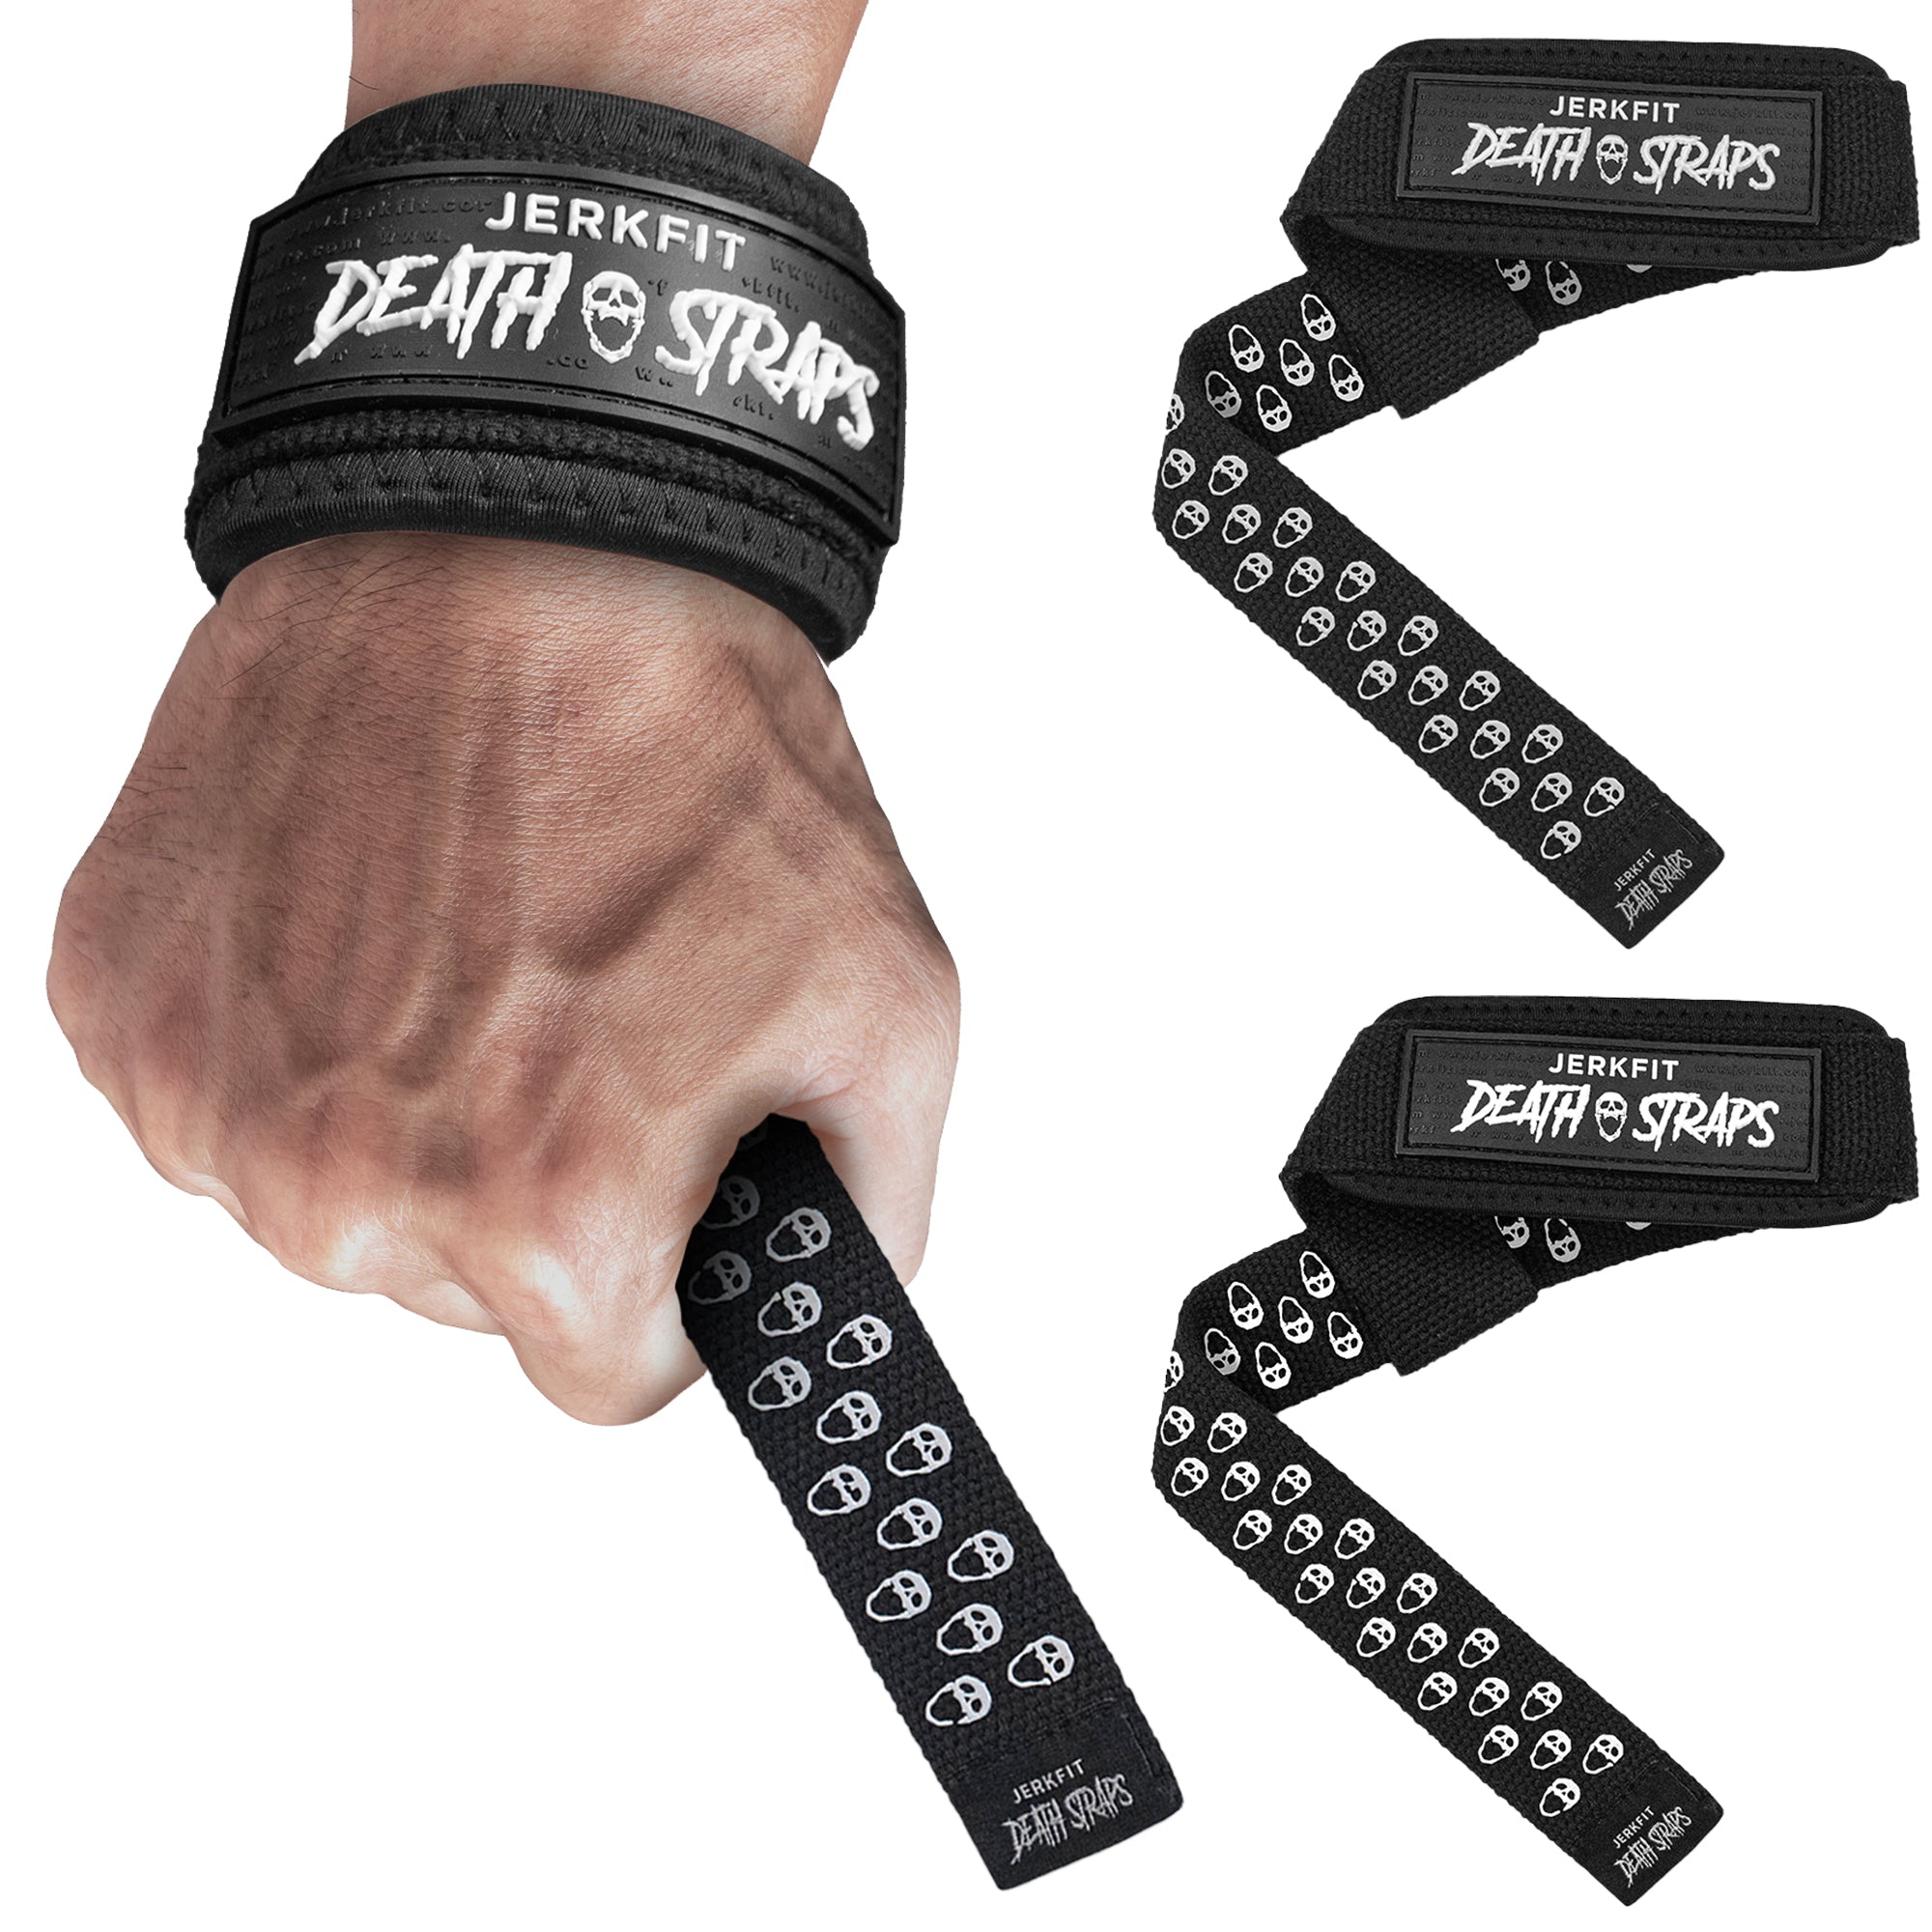 JerkFit Death Straps, Traditional Lifting Straps with Double Sided Sku